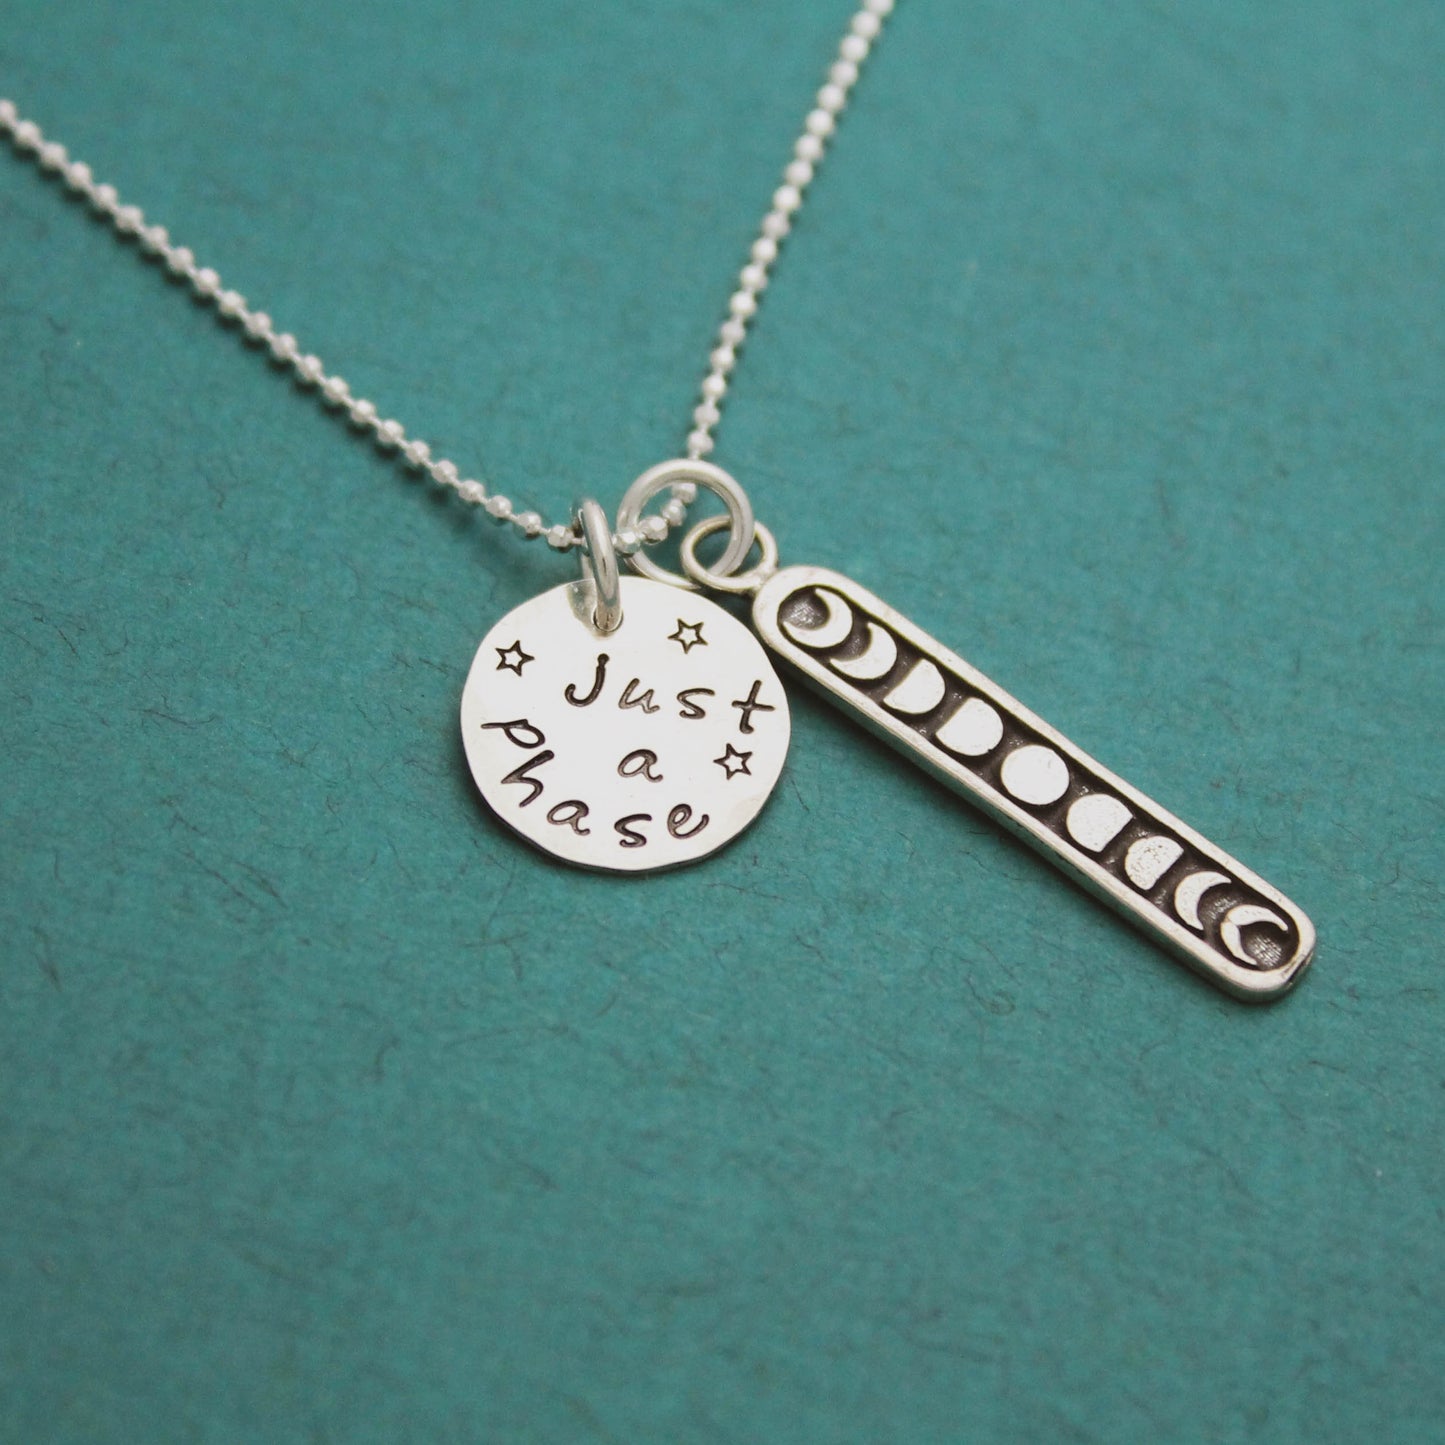 Moon Phases Tag Necklace, Moon Necklace, Phases of the Moon Jewelry, Just a Phase Necklace, Moon Star Jewelry Gift for Her, Astronomy Gift